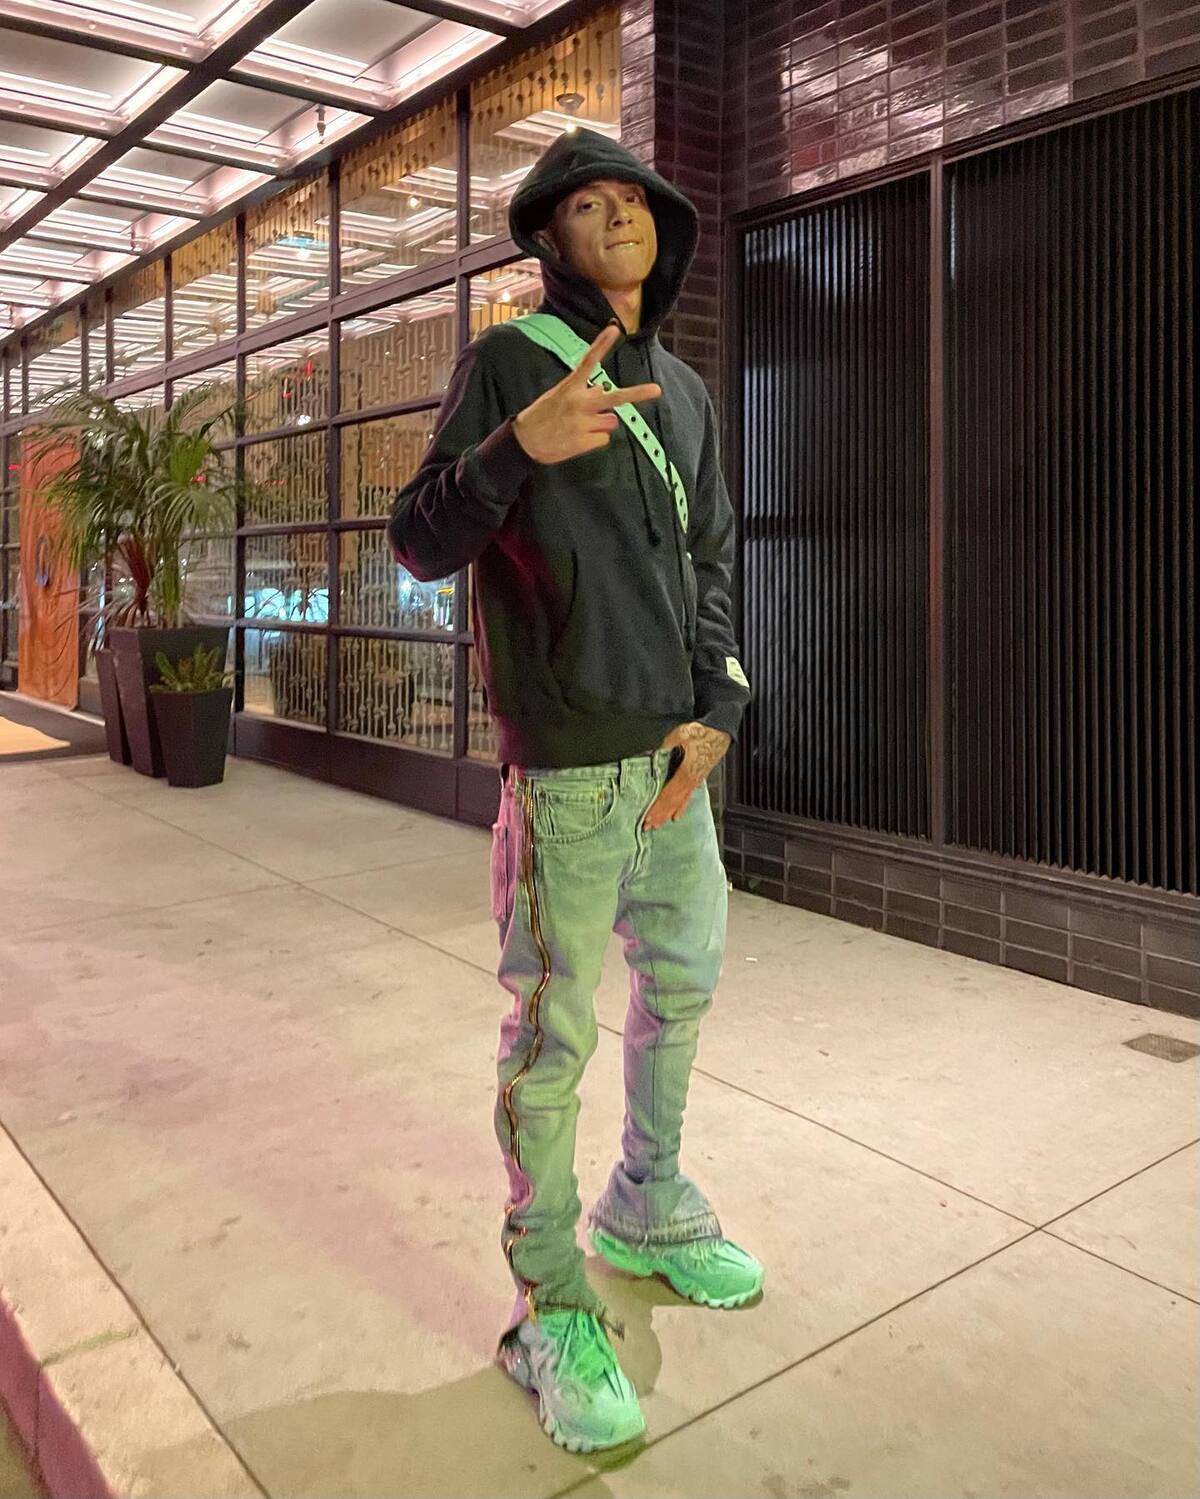 What jeans is central cee wearing here?? : r/findfashion